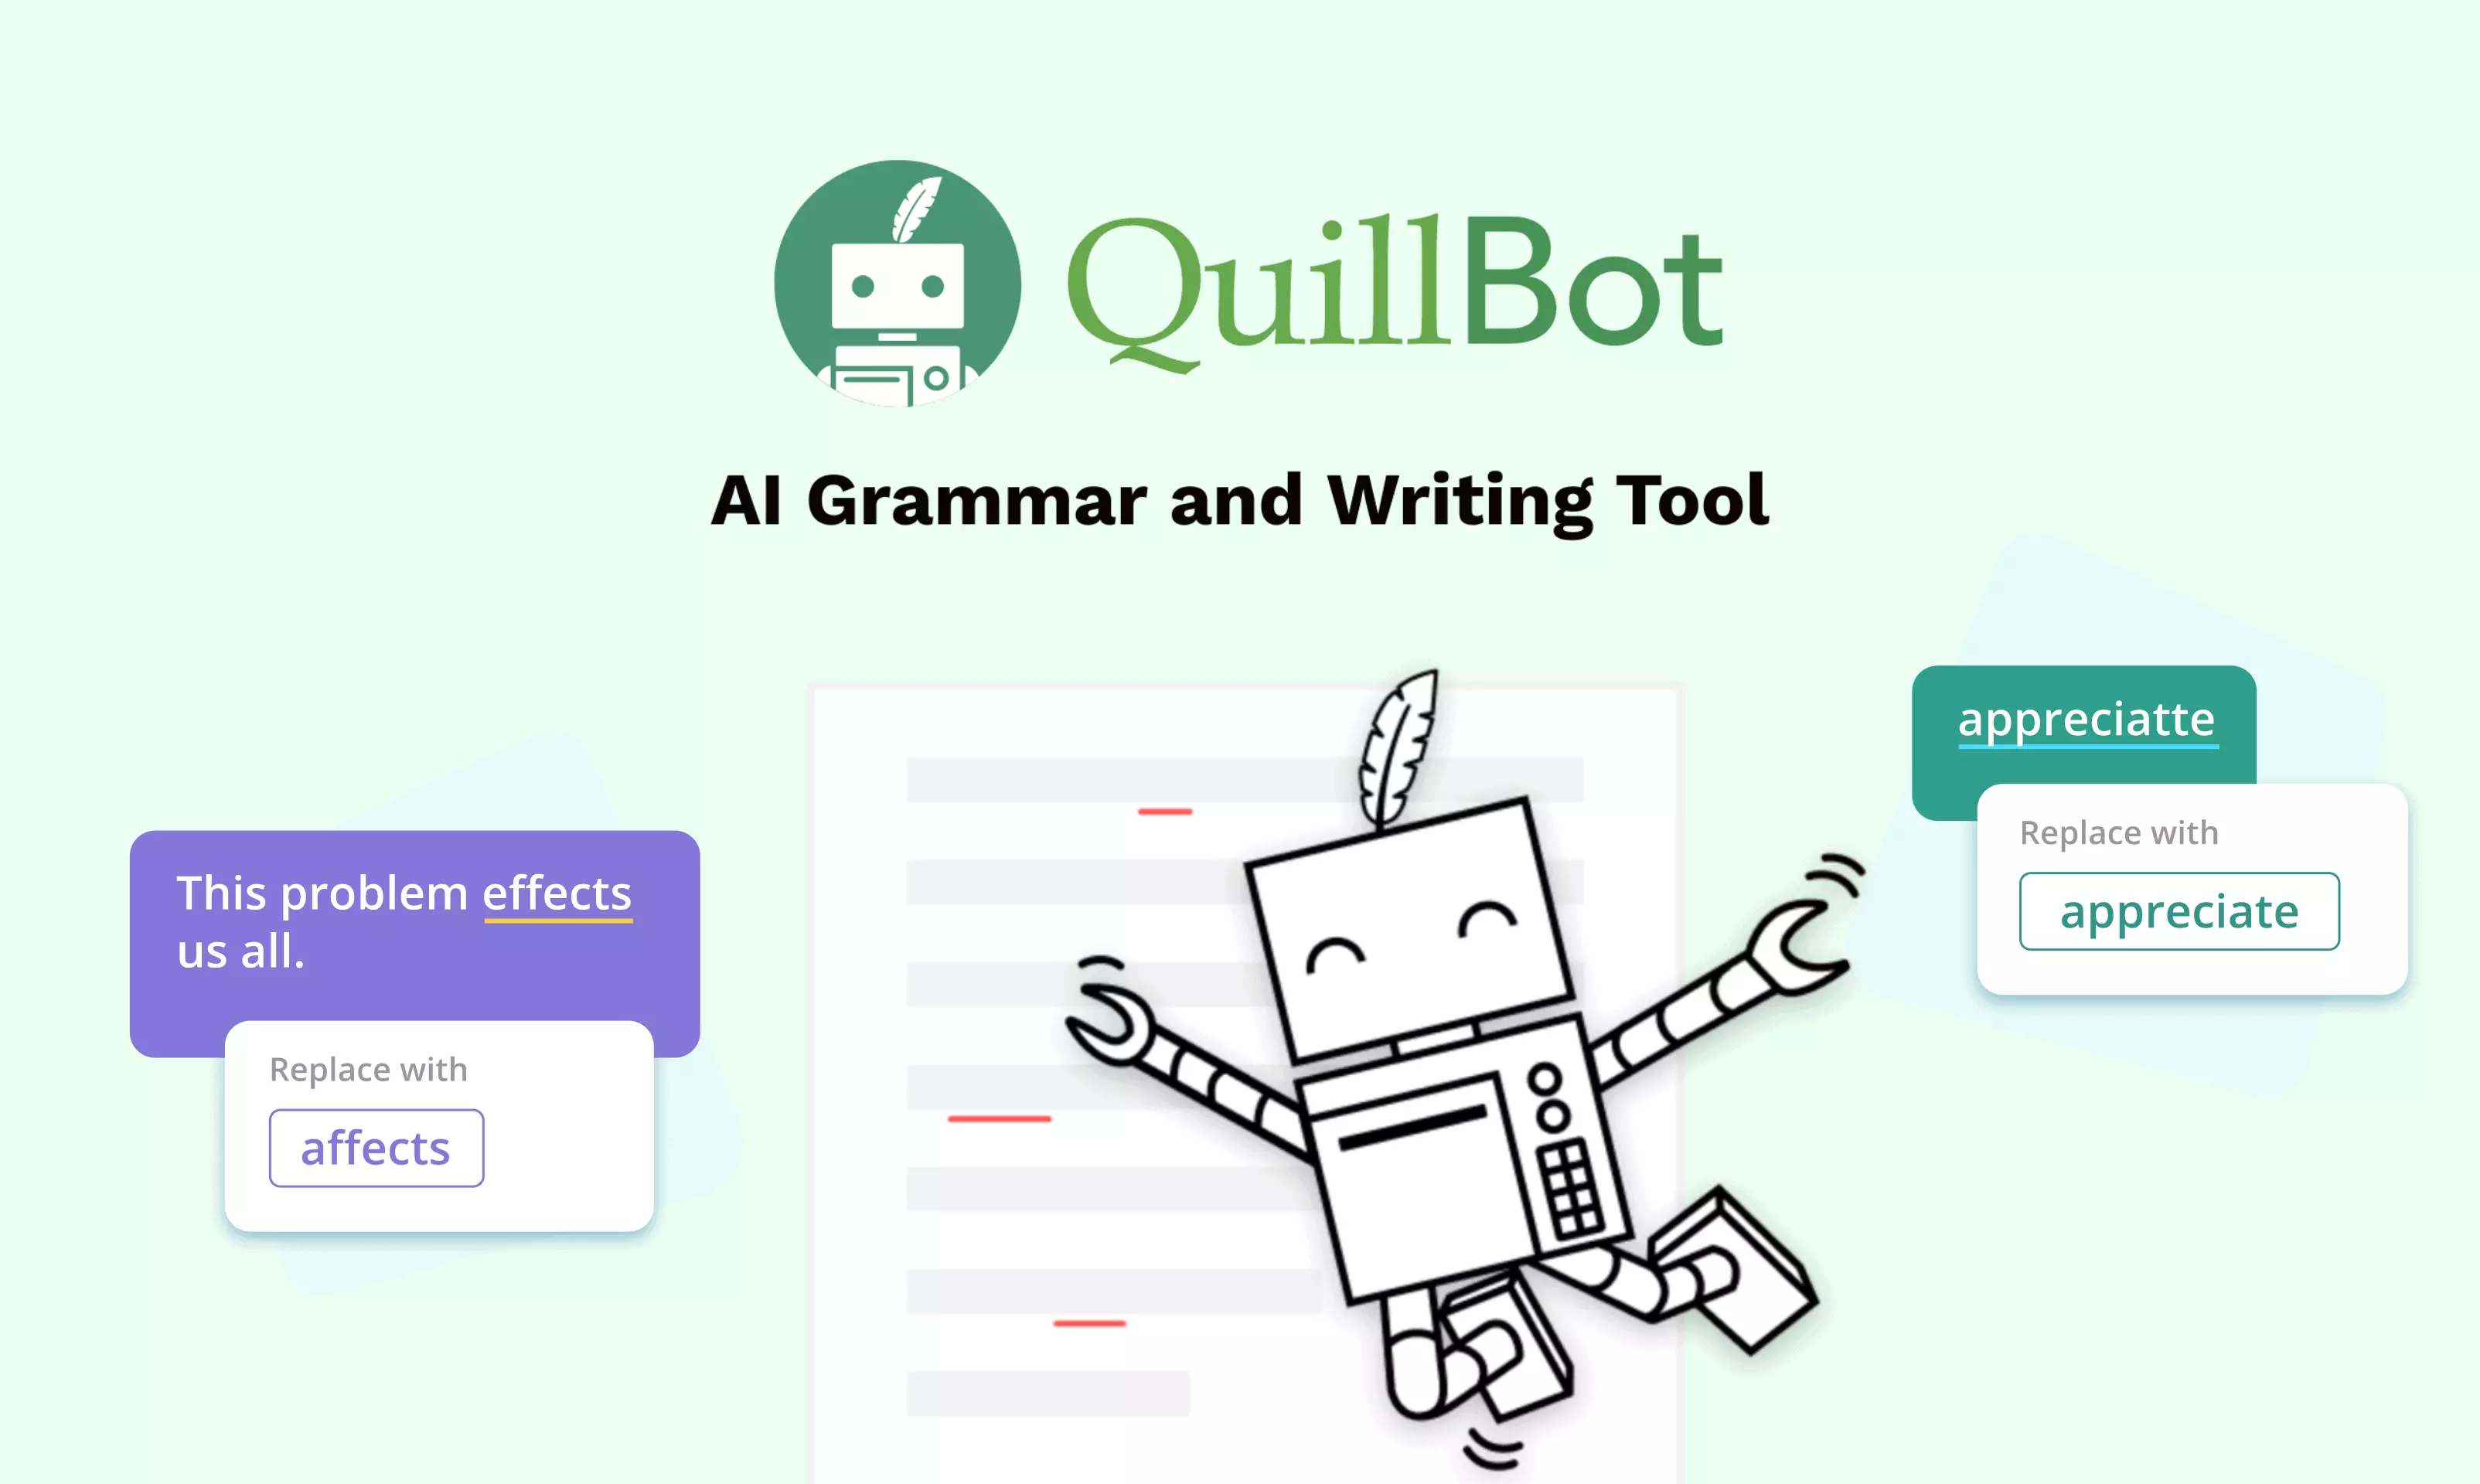 Does Turnitin Detect Quillbot